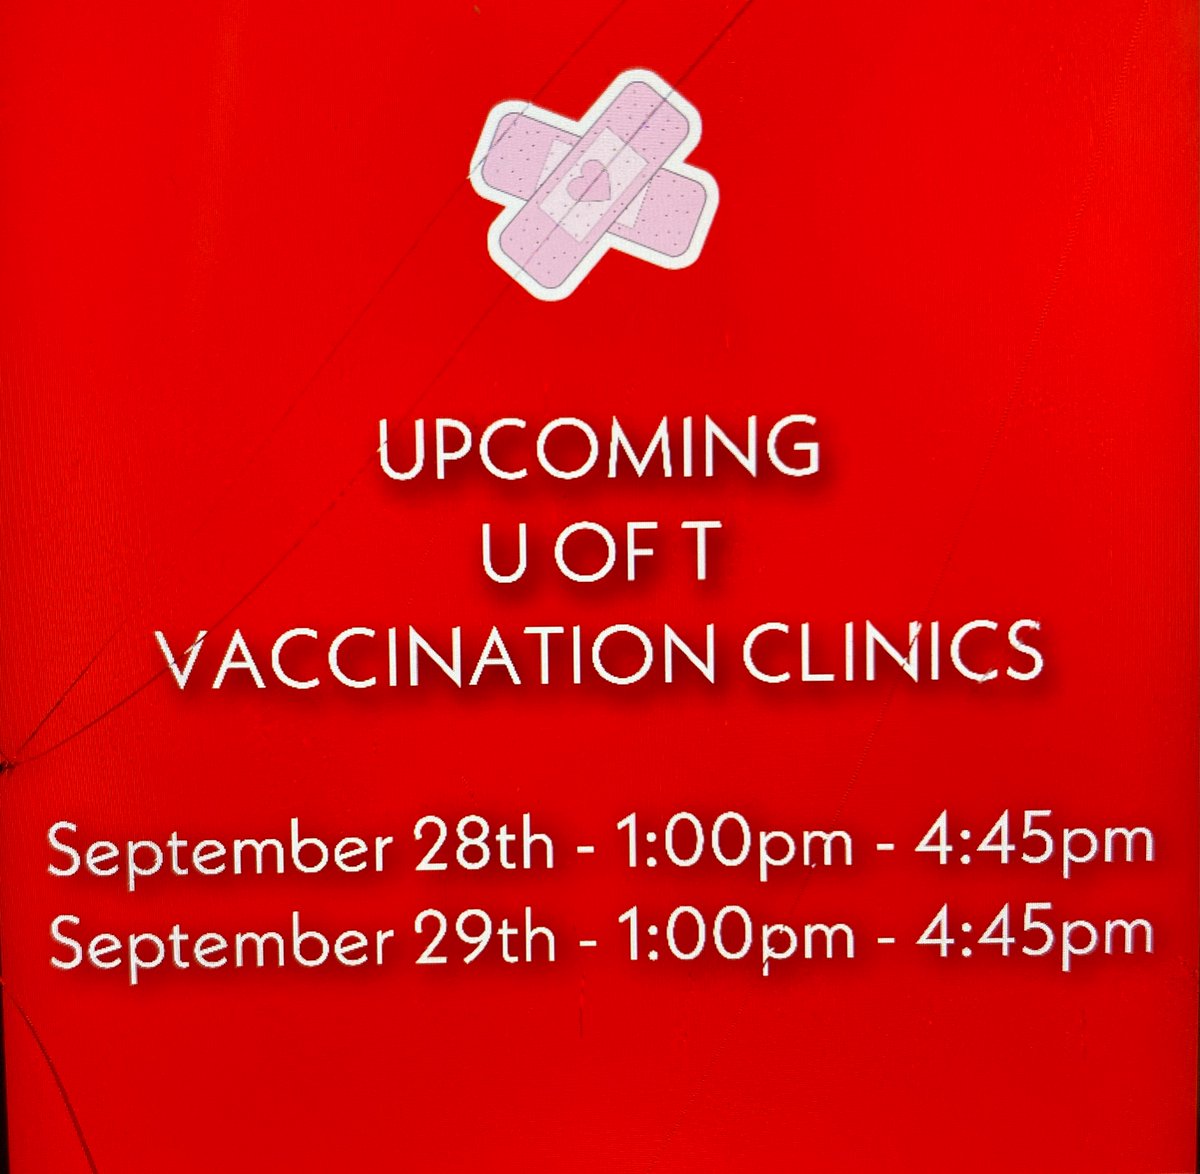 Hello Toronto! 🗓️Book your appointment at our clinic for Sept. 28th & 29th, 1:00pm - 4:45pm! 💉Eligibility: -Anyone born 2009 and earlier -1st + 2nd doses -International students requiring an mRNA BOOSTER -Those eligible for 3rd dose 📍255 McCaul St. 🔗Link to book in bio!